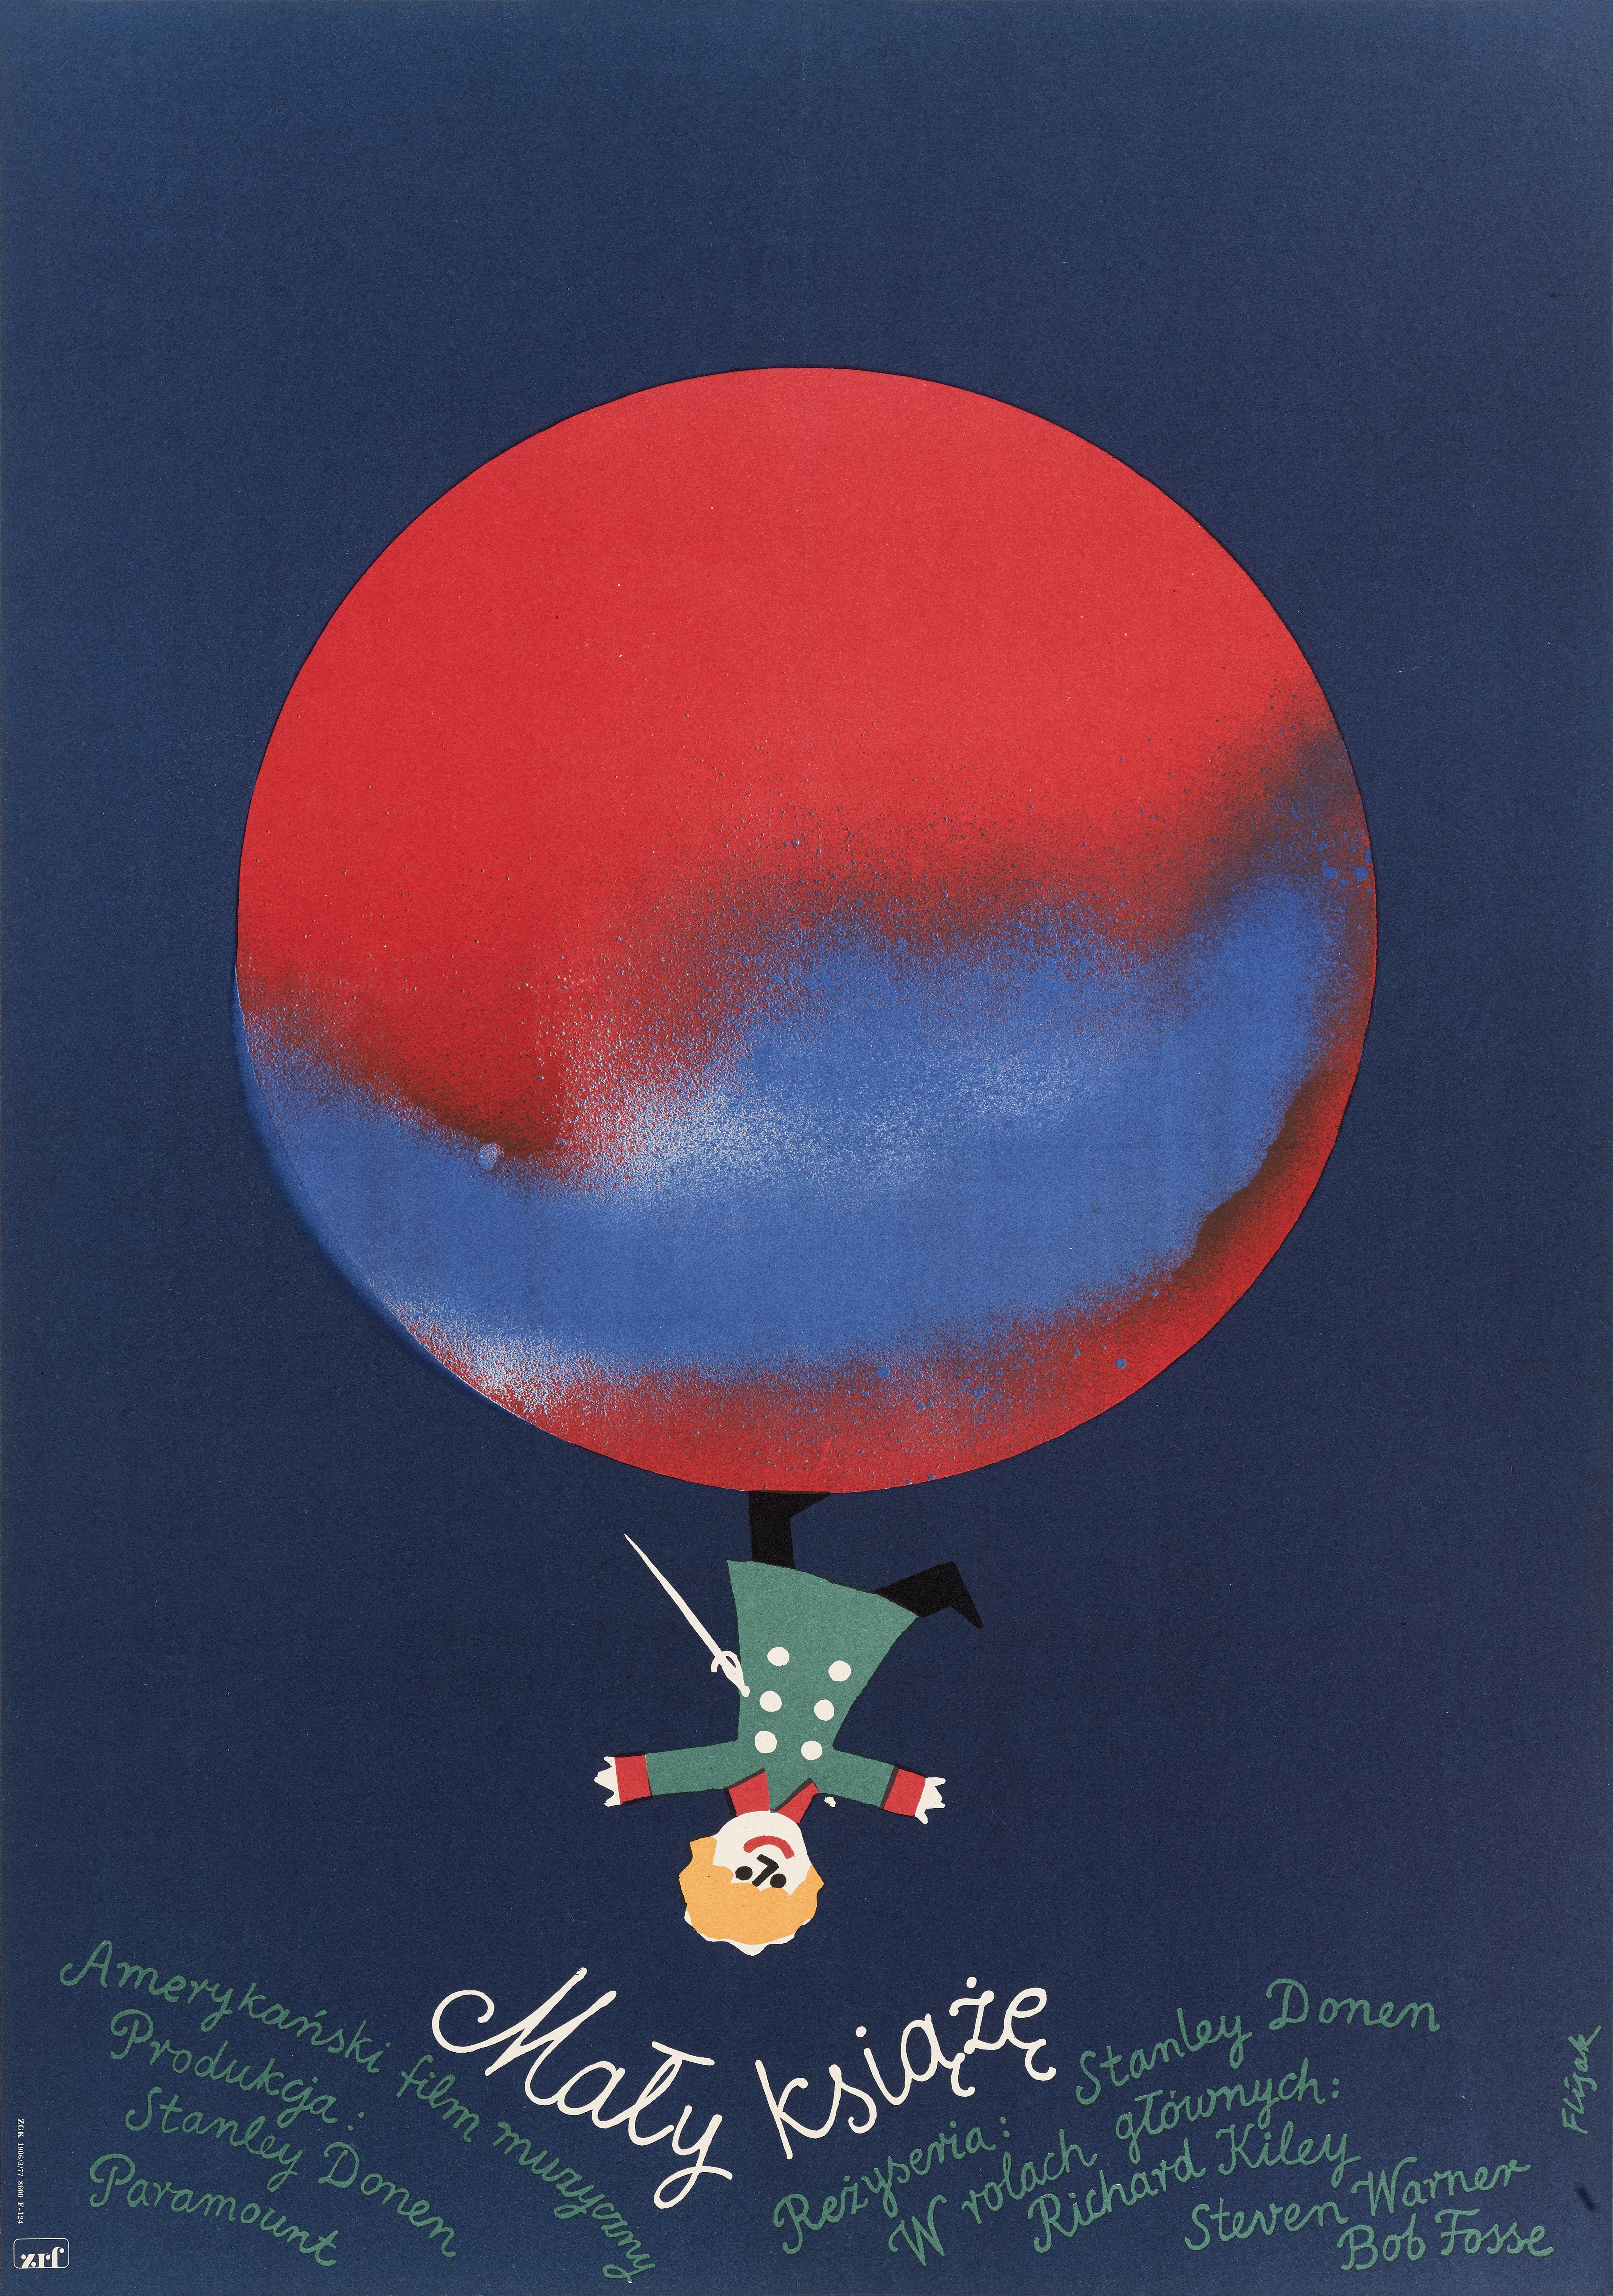 Original Polish film poster for film The Little Prince 1974.
This charming poster designed by Jerzy Flisak (1930-2008) was created for the films Polish release in 1977.
This film was directed by Stanley Donen and starred Richard Kiley, Steven Warner